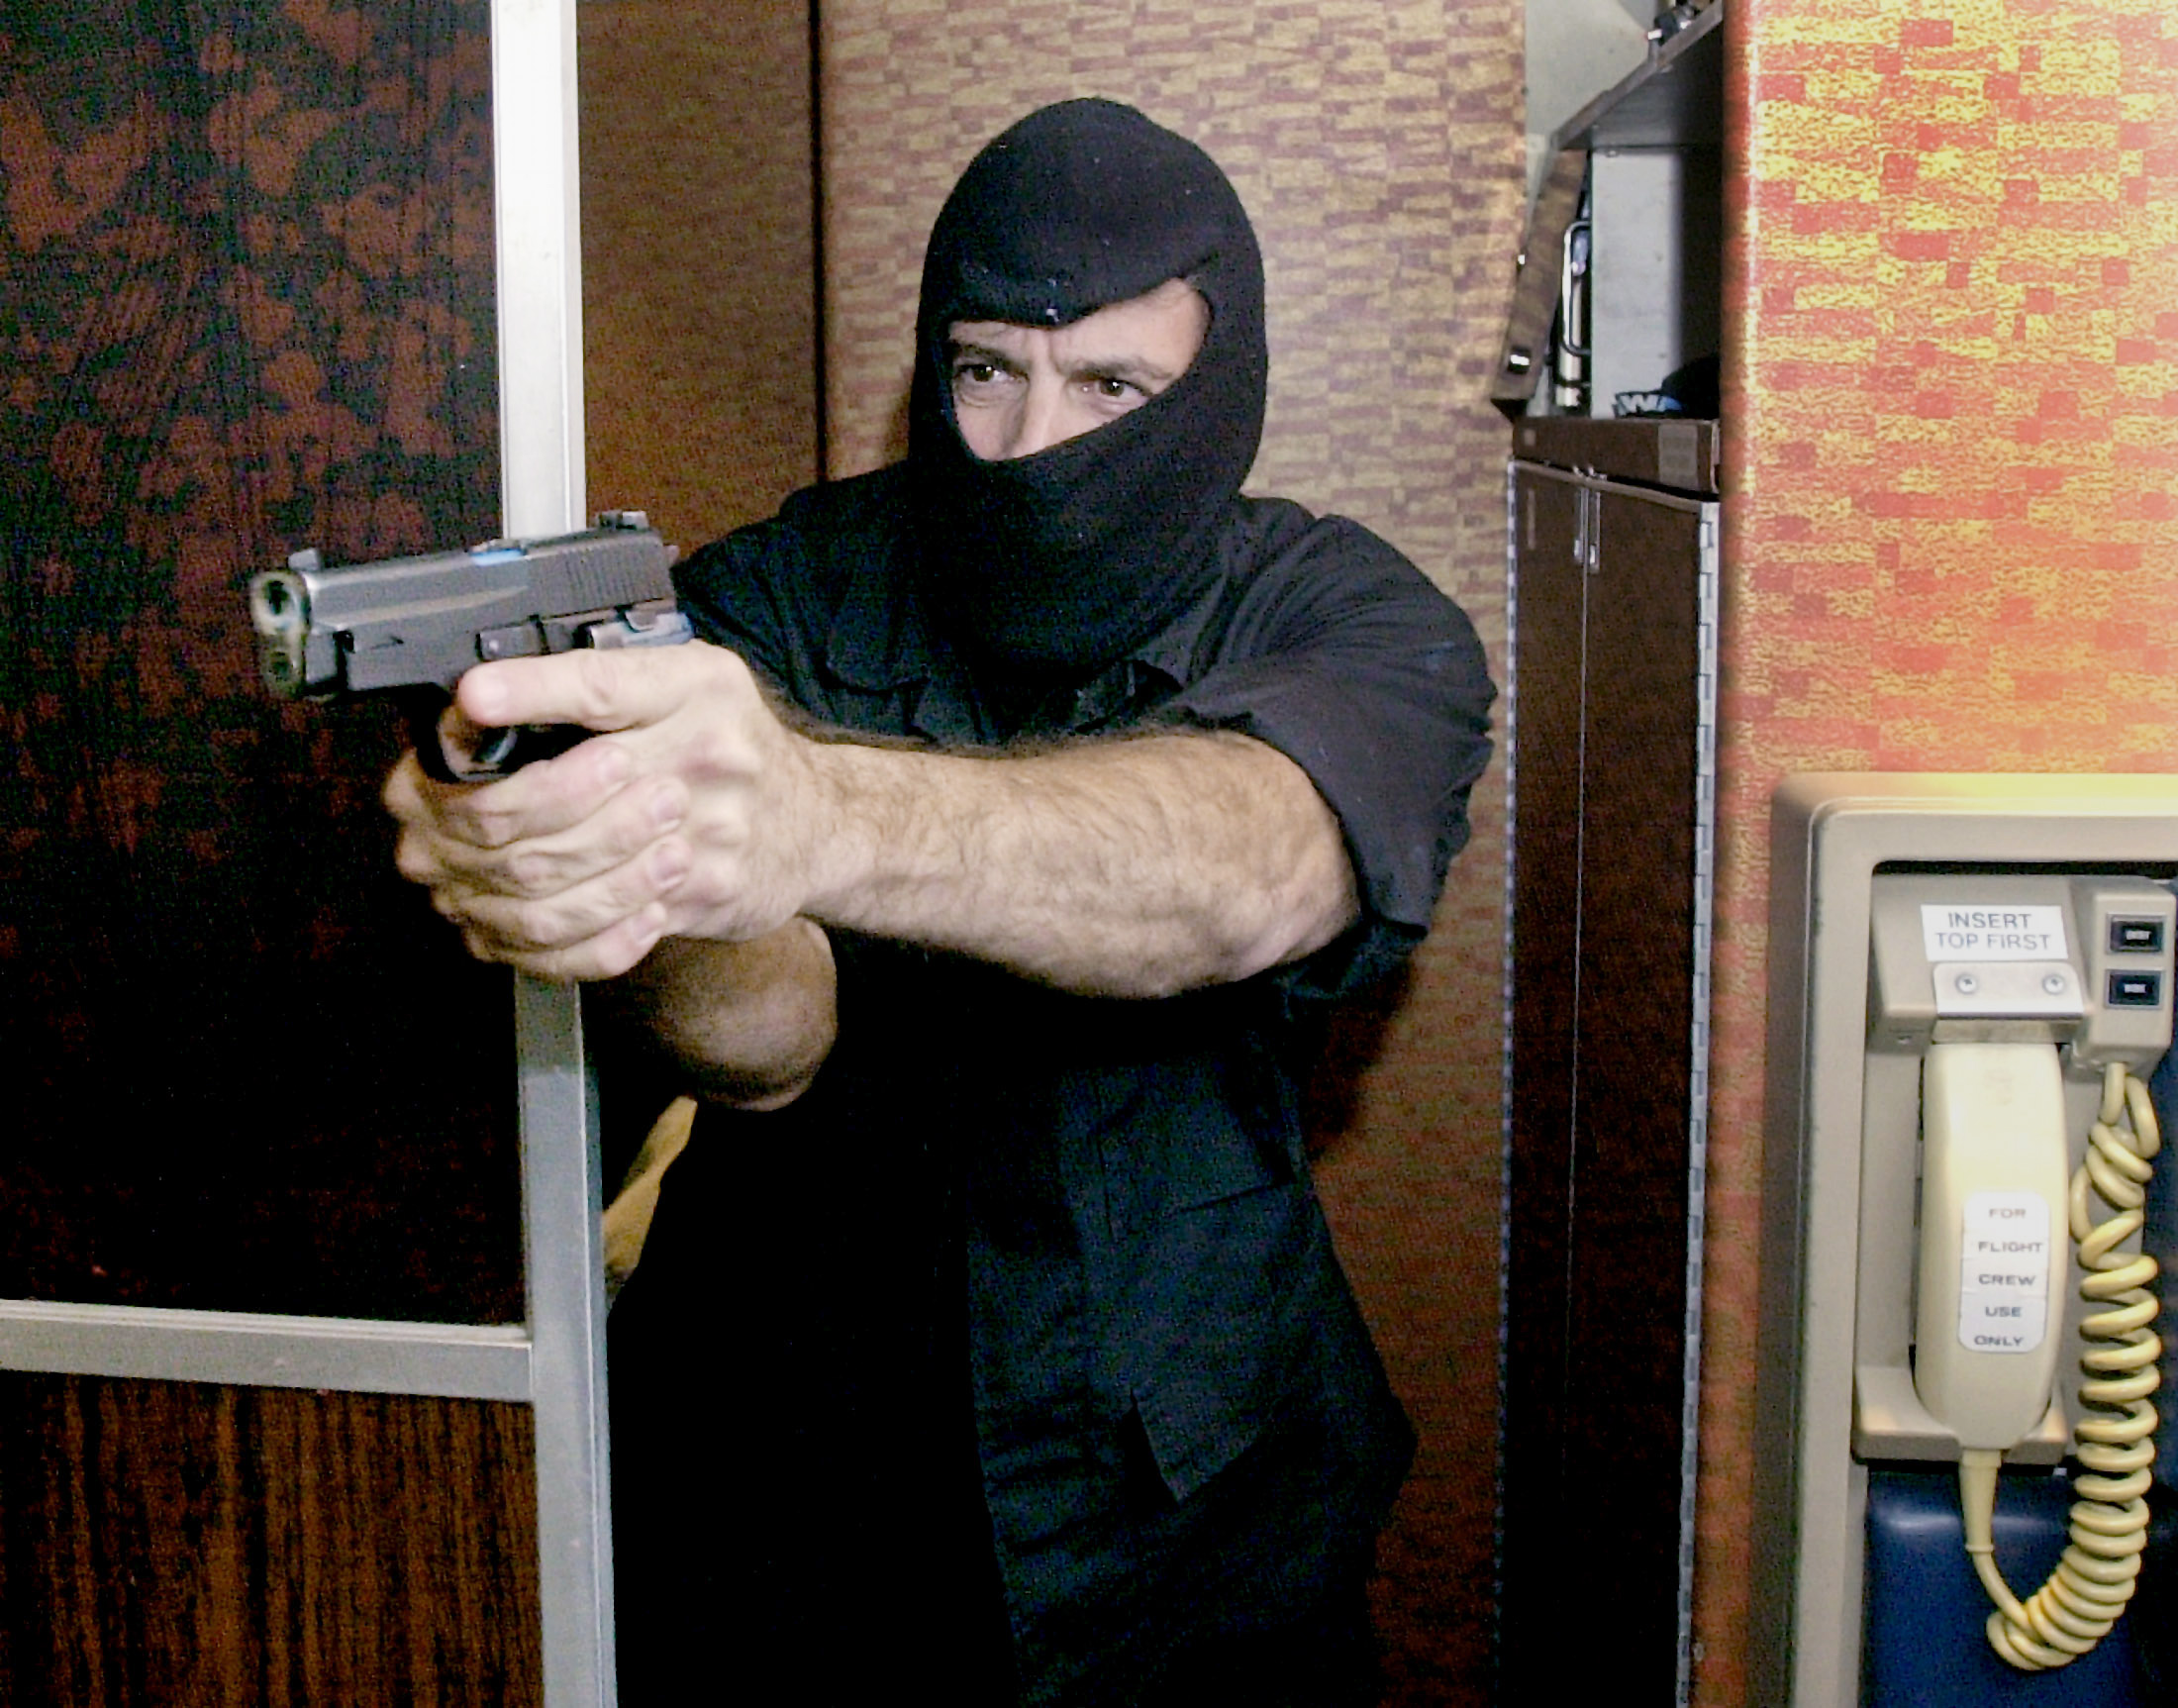 PHOTO: A Federal Aviaition Administration Sky Marshal wields a pistol during a simulated hijacking aboard a retired aircraft at the FAA training facility in Pomona, N.J. on Sept. 26, 2001.